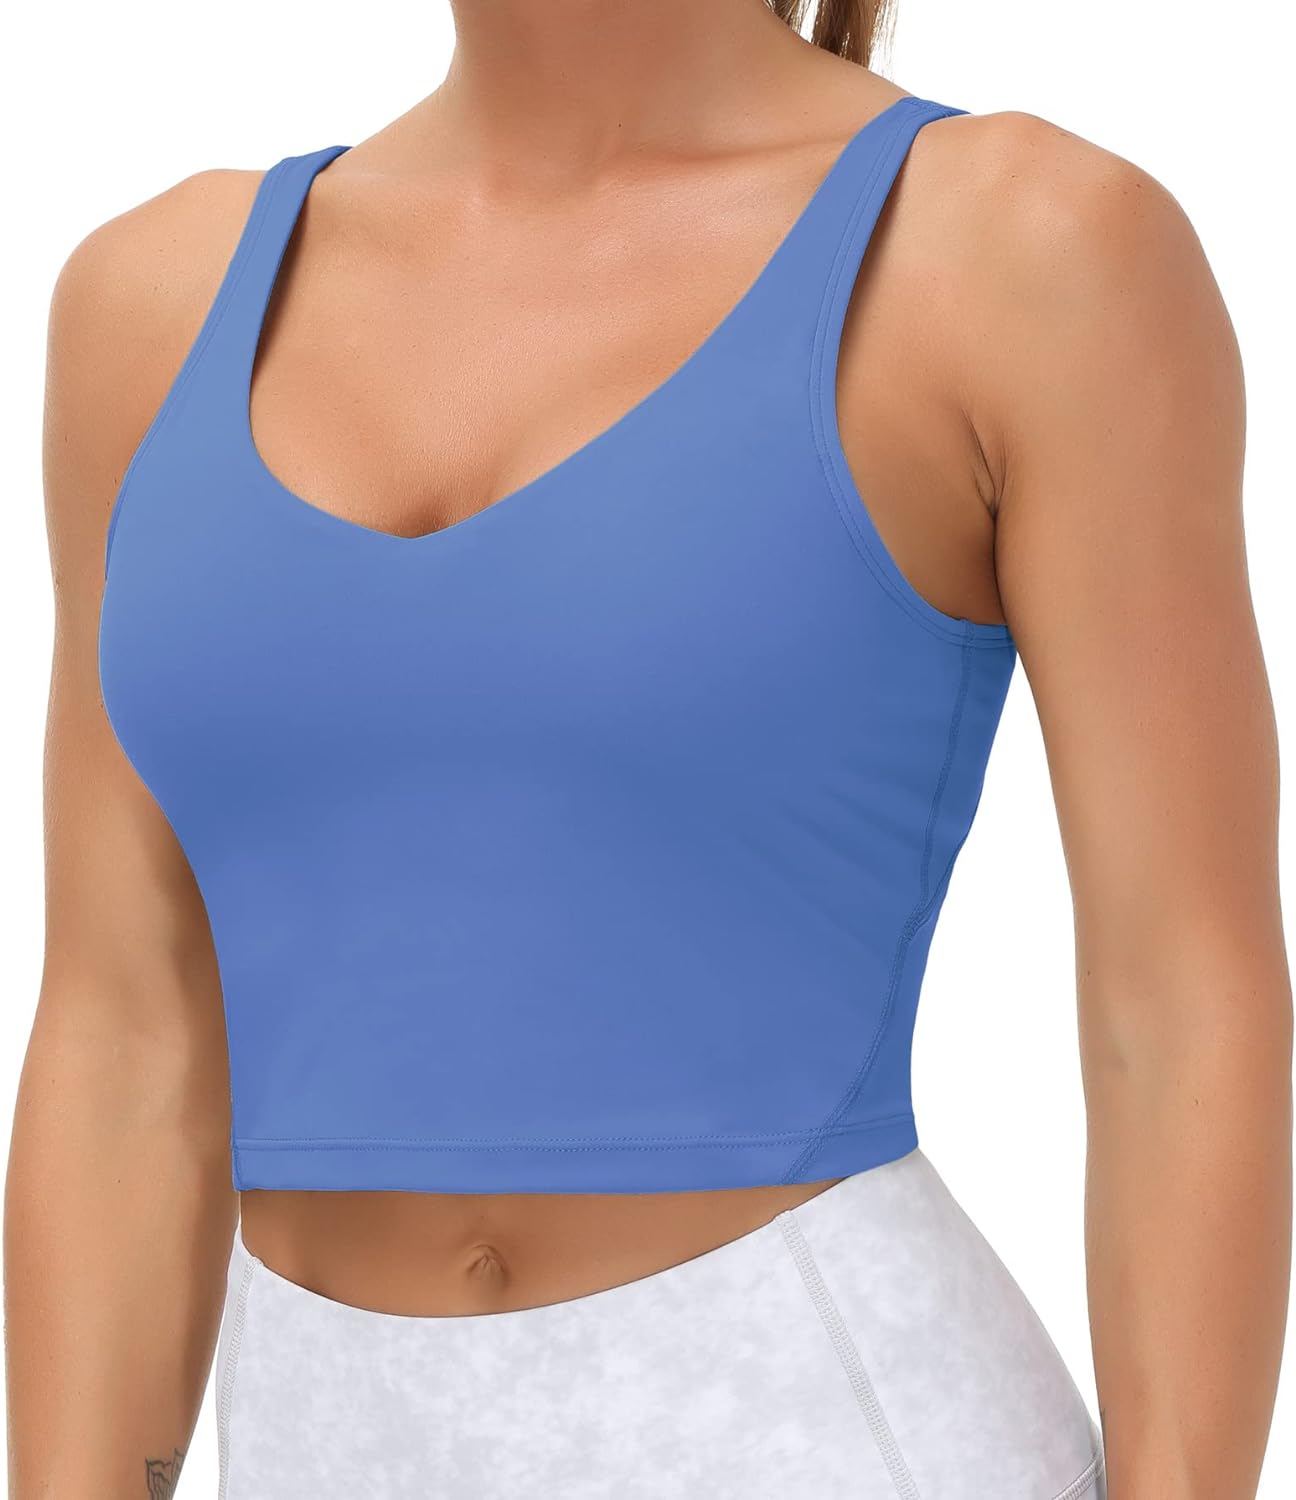 Womens' Sports Bra Longline Wirefree Padded with Medium Support